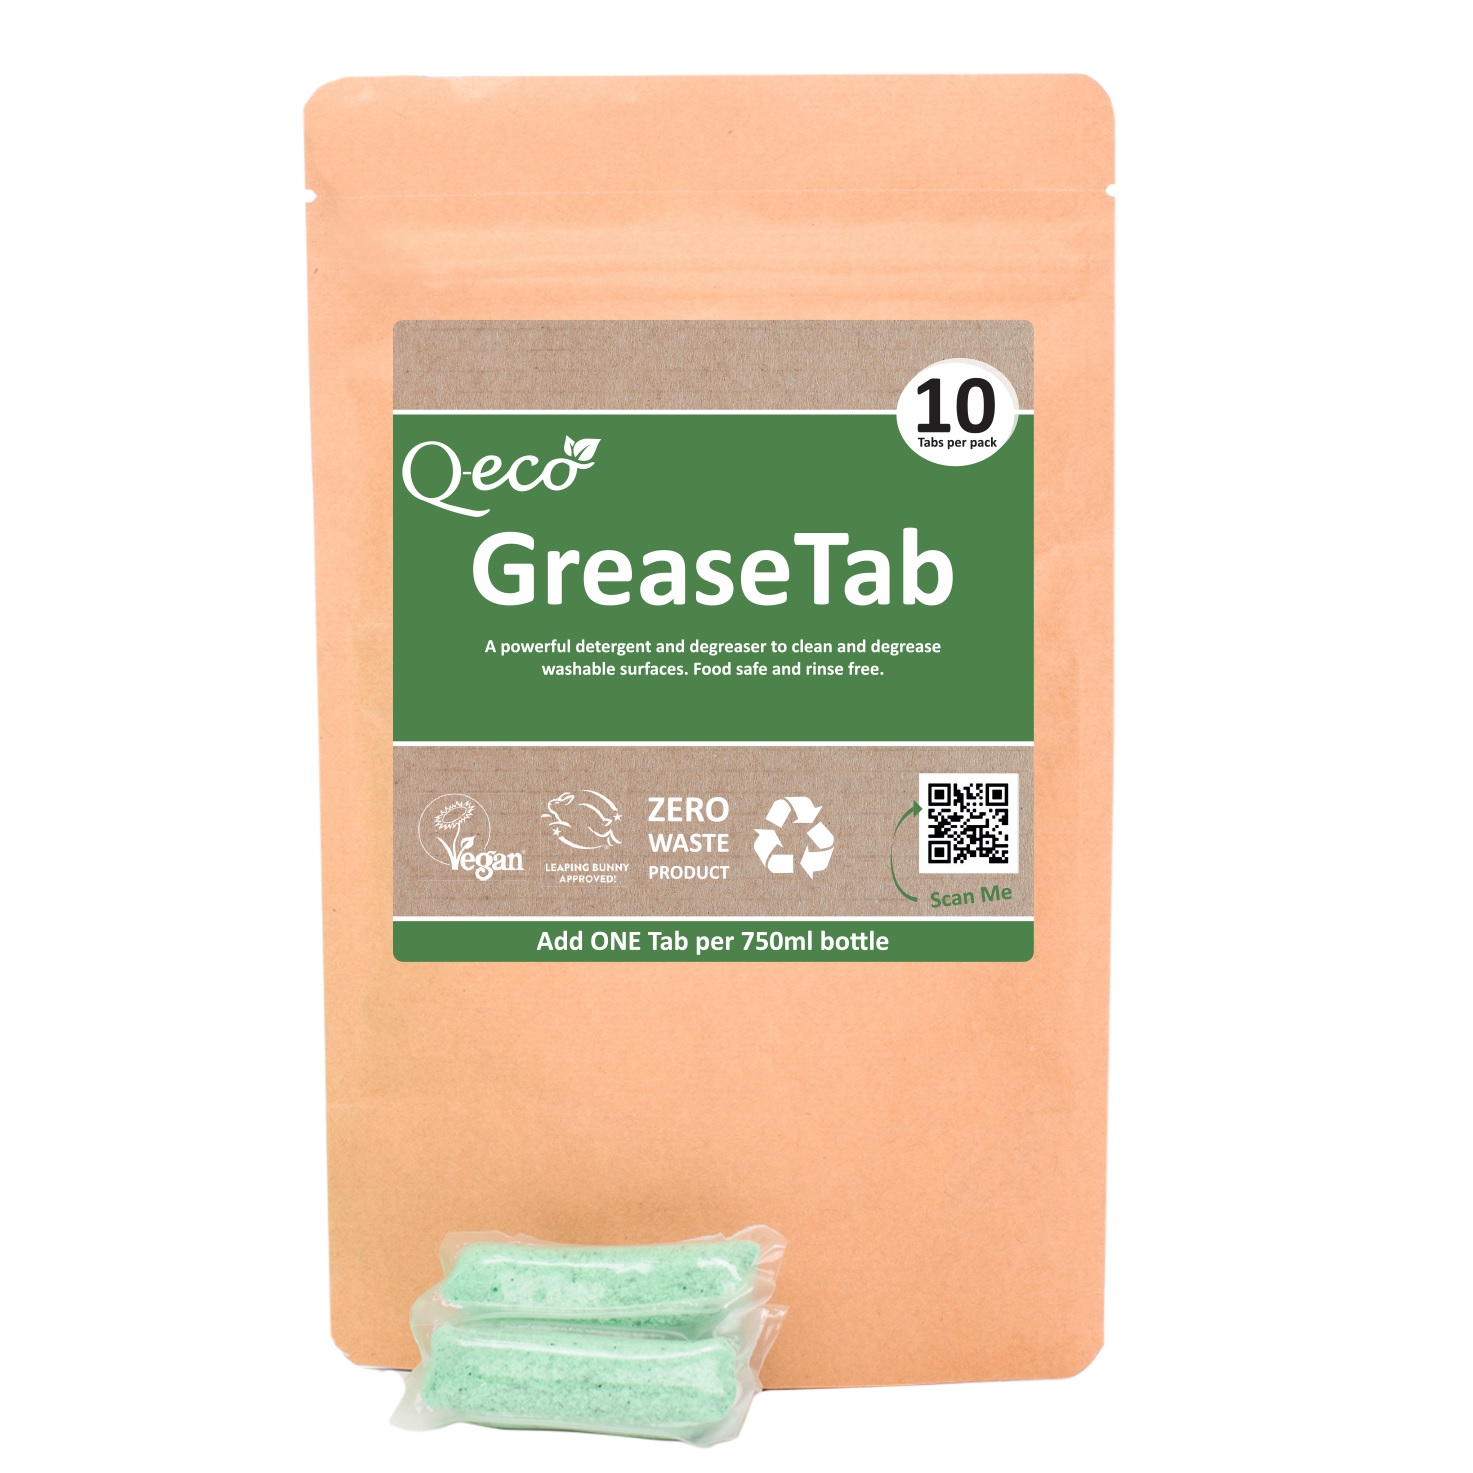 Q-Eco-GreaseTab---Heavy-Duty-Degreaser-Cleaning-Tabs--Pack-of-10-